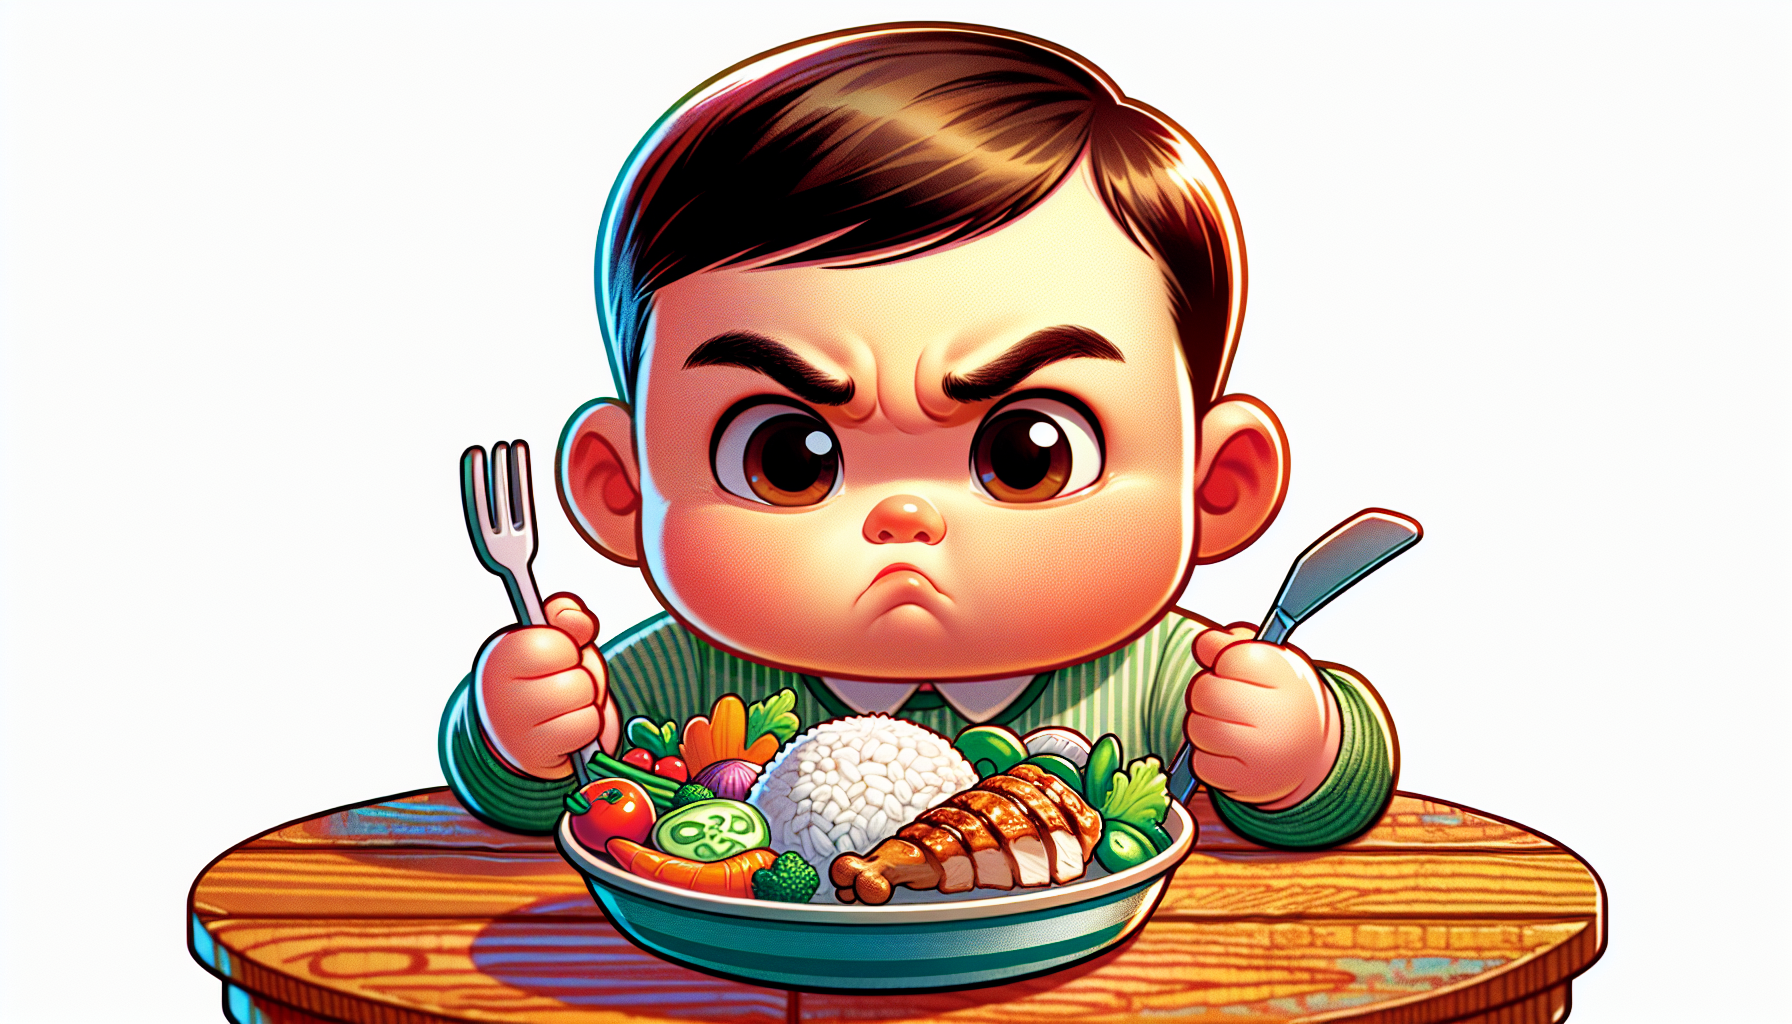 Cartoon image of a child making a face while looking at different types of food